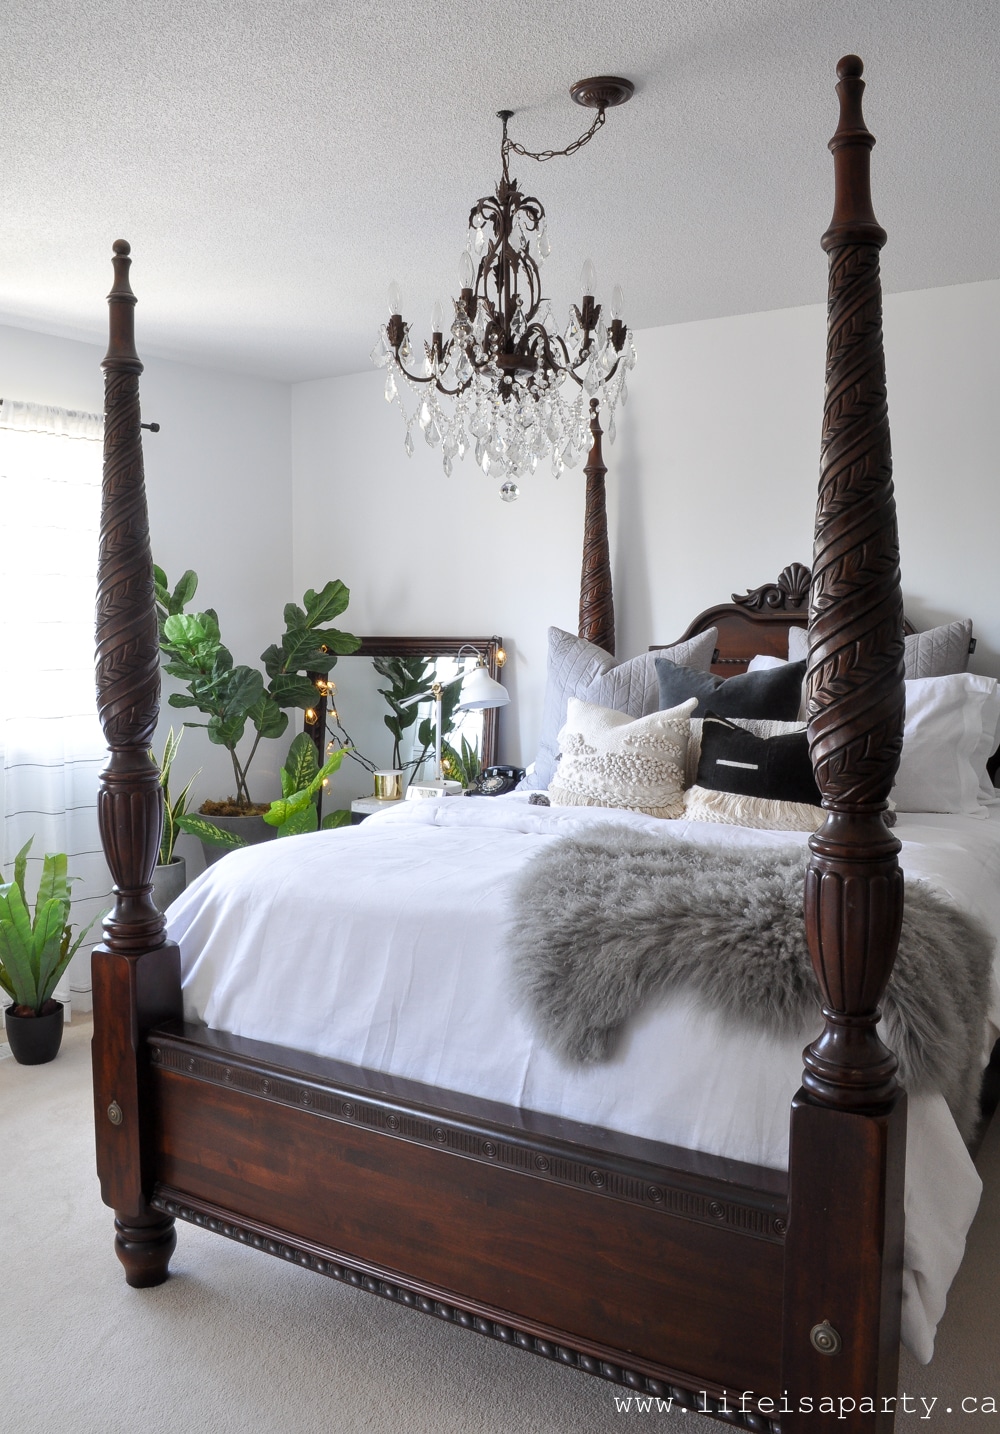 Modern Boho Bedroom: Black and white, woven wall hangings, a modern gallery wall, lots of plants, boho string lights, and tons of textured pillows give this room its European Modern Bohemian vibe.